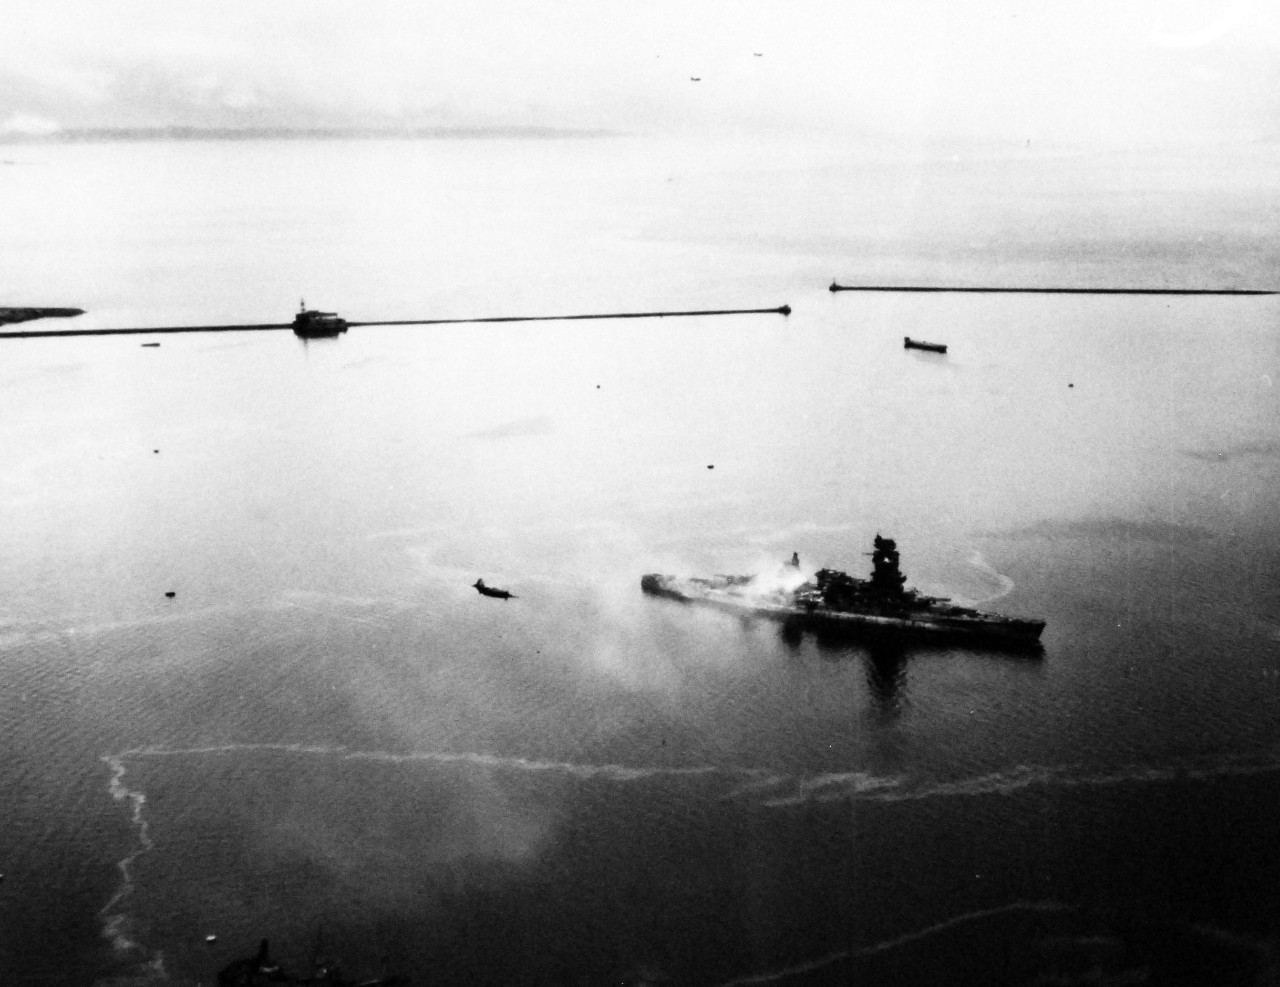 80-G-343772:  Japanese battleship Nagato, 1945.     The badly damaged Japanese battleship Nagato off Yokosuka Naval Air Station, Japan, as seen from plane of USS Shangri La (CV-38).    Photographed by Photographer’s Mate Second Class J. Guttoach, August 26, 1945.  Official U.S. Navy Photograph, now in the collections of the U.S. National Archives.   (2014/5/22). 